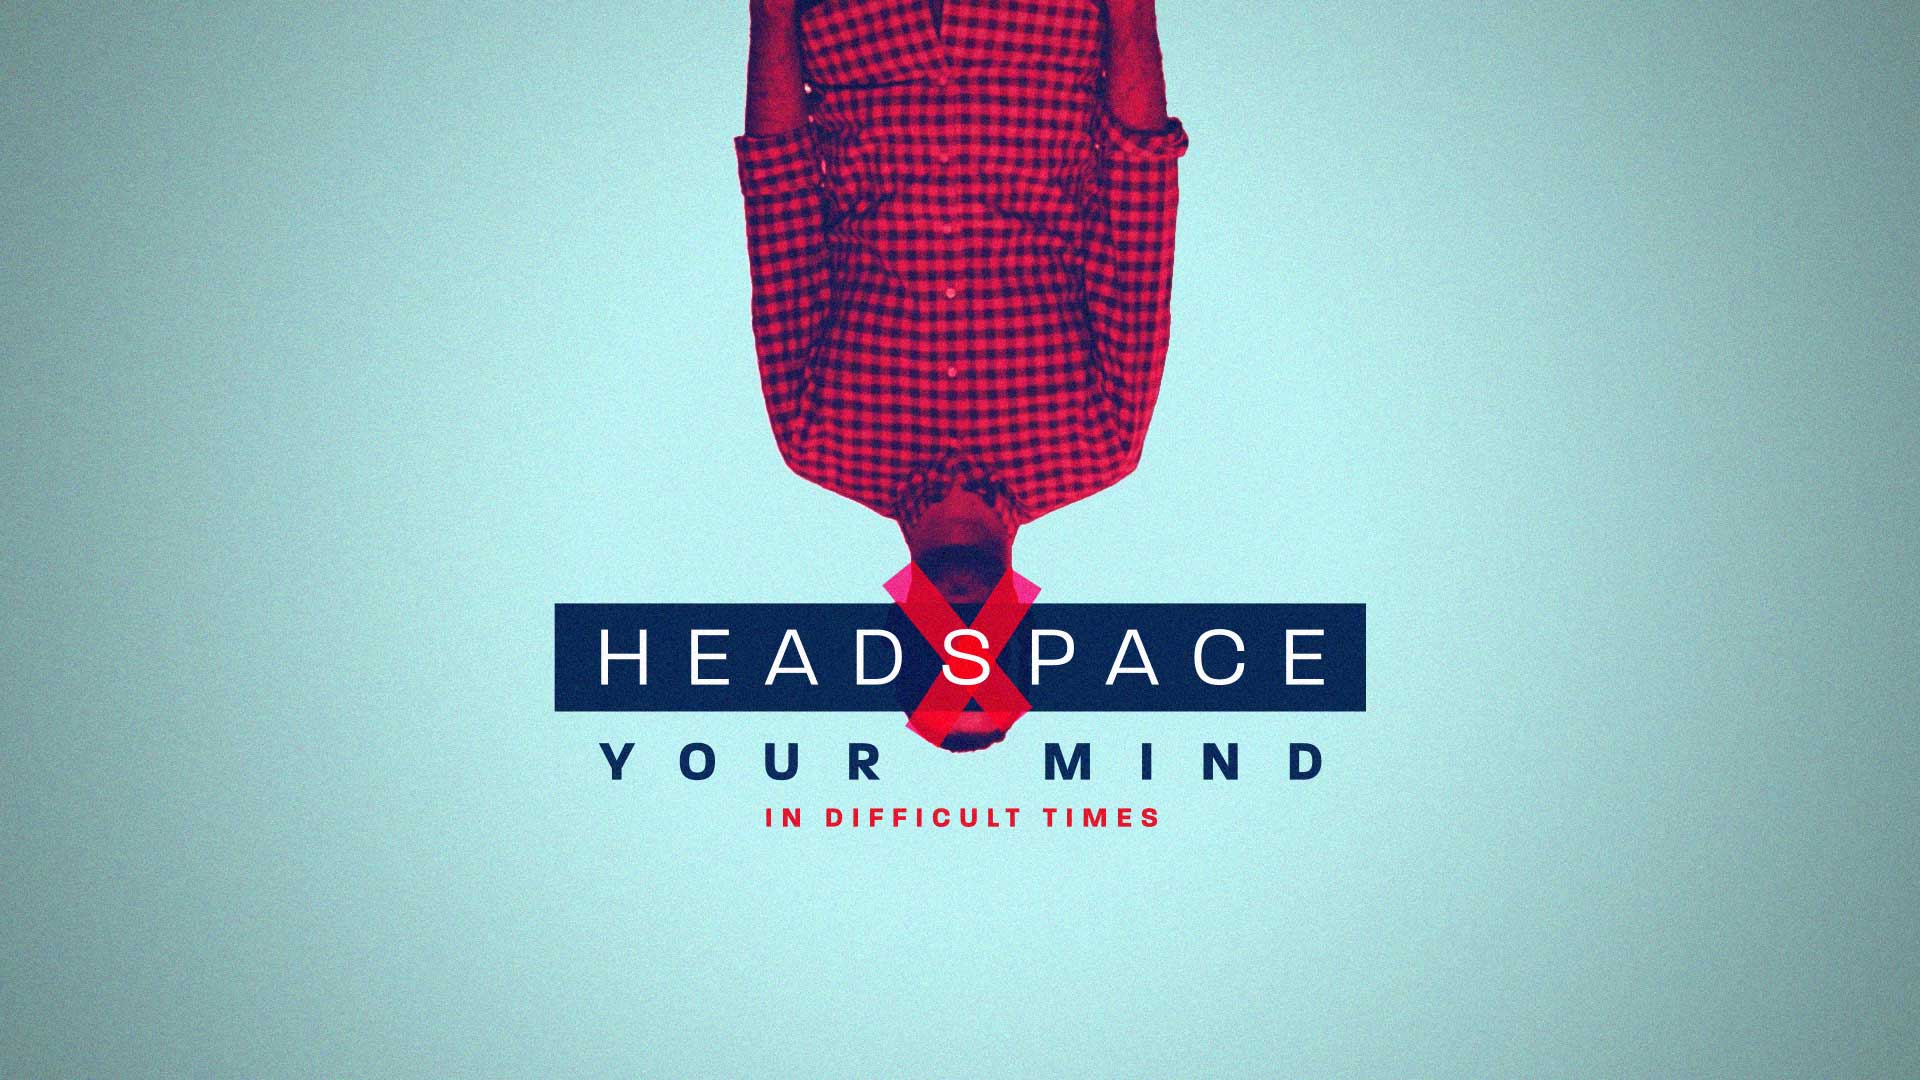 Headspace - Your Mind In Difficult Times